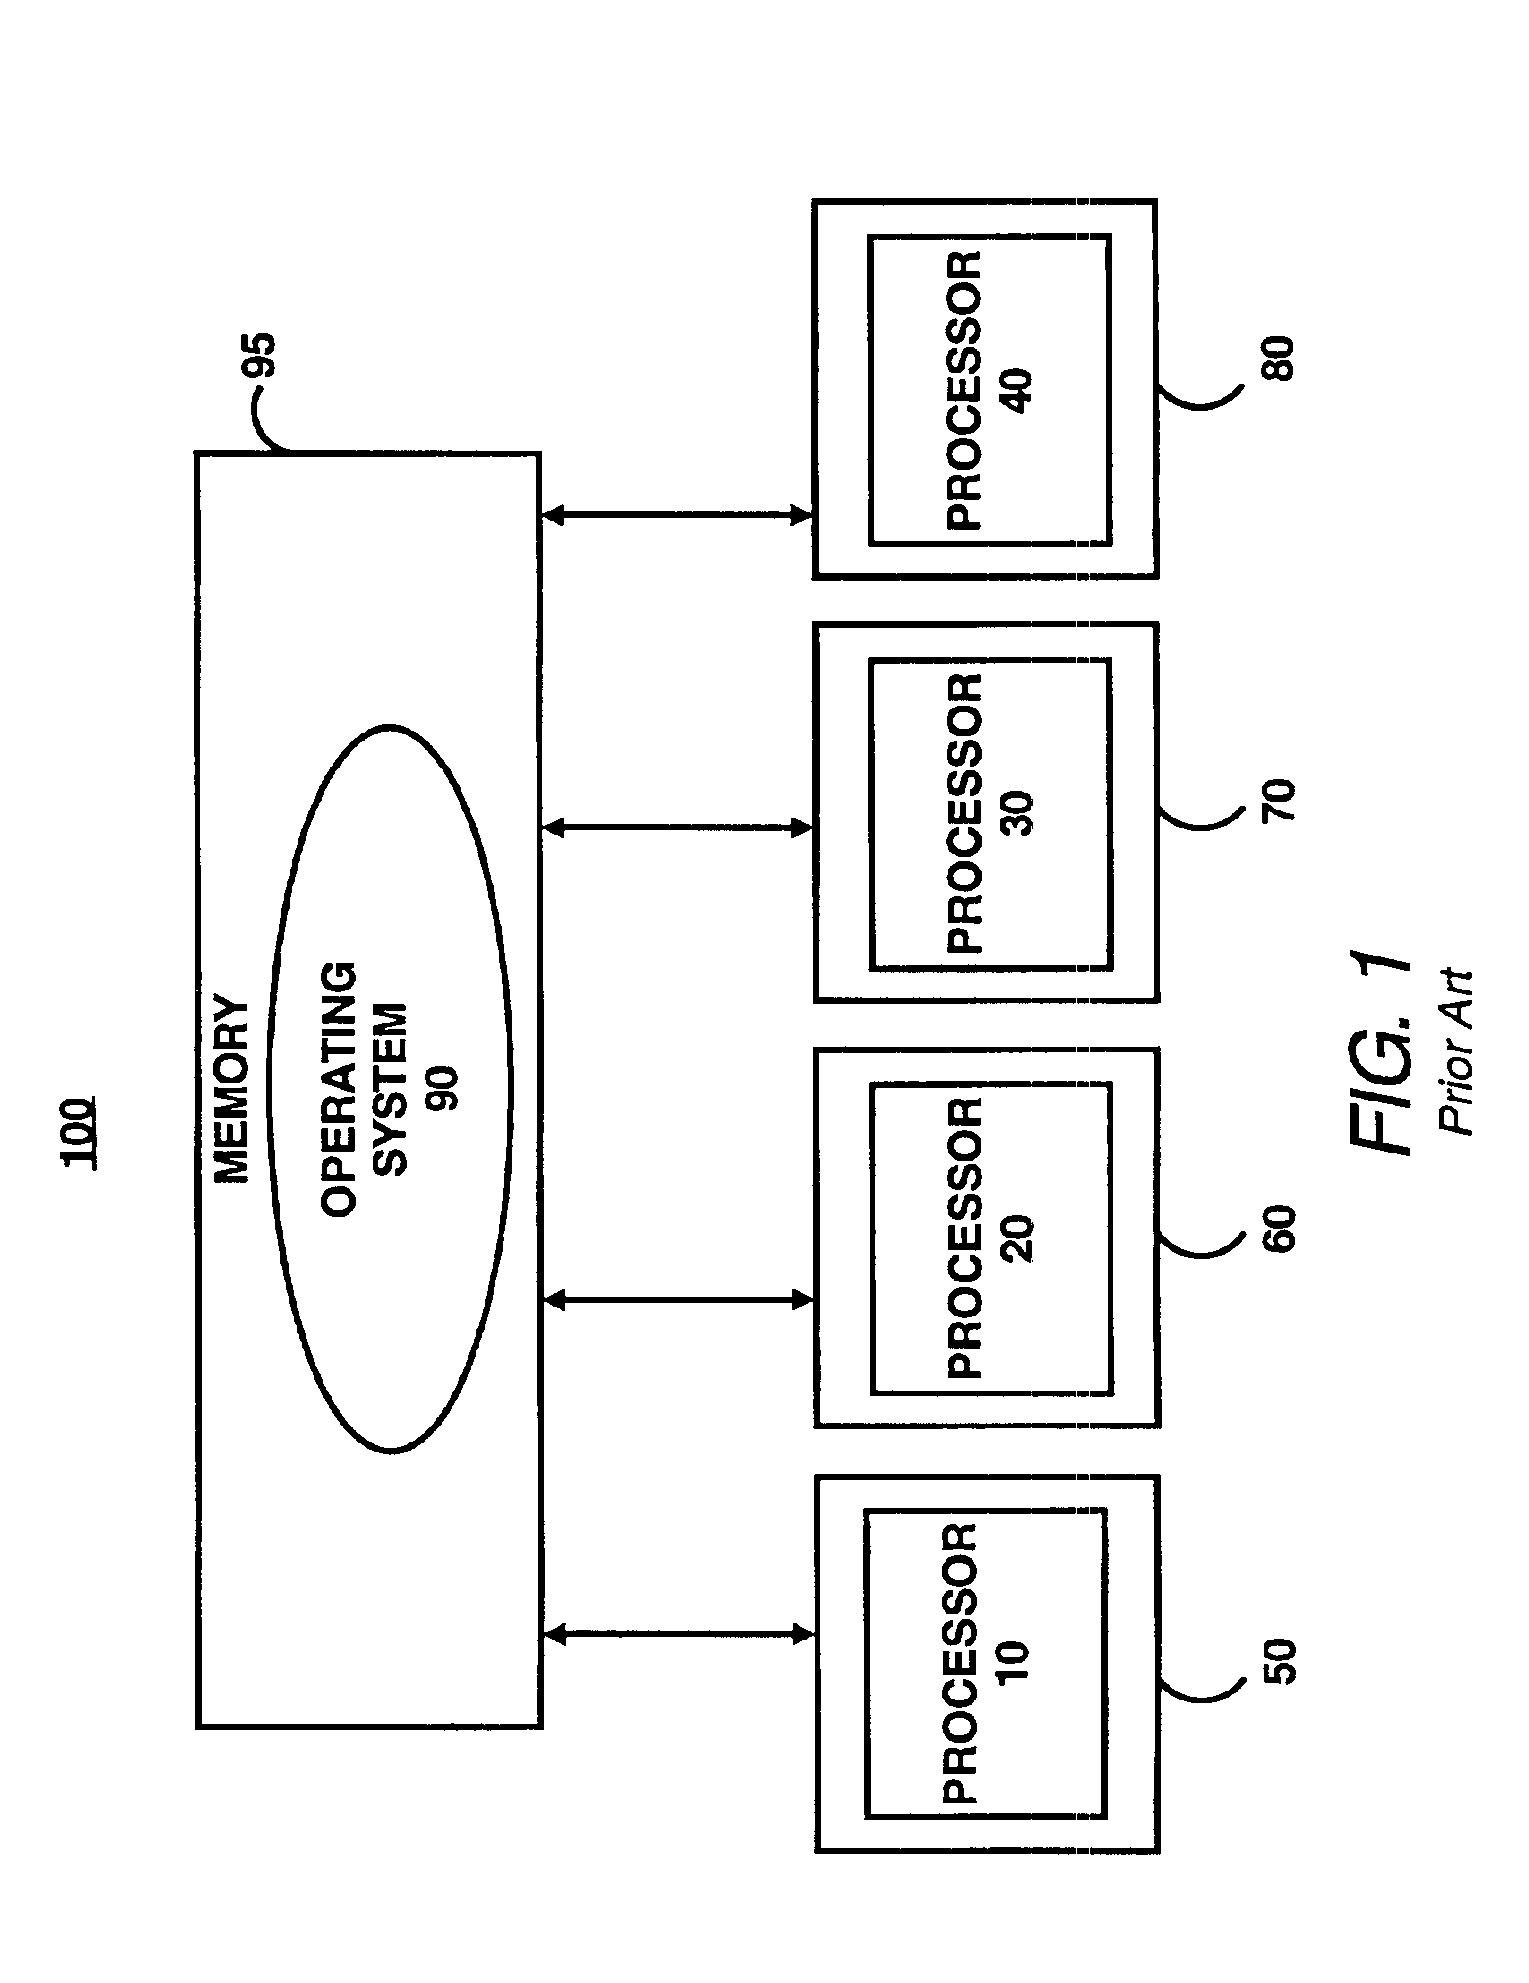 Chip multiprocessor with multiple operating systems